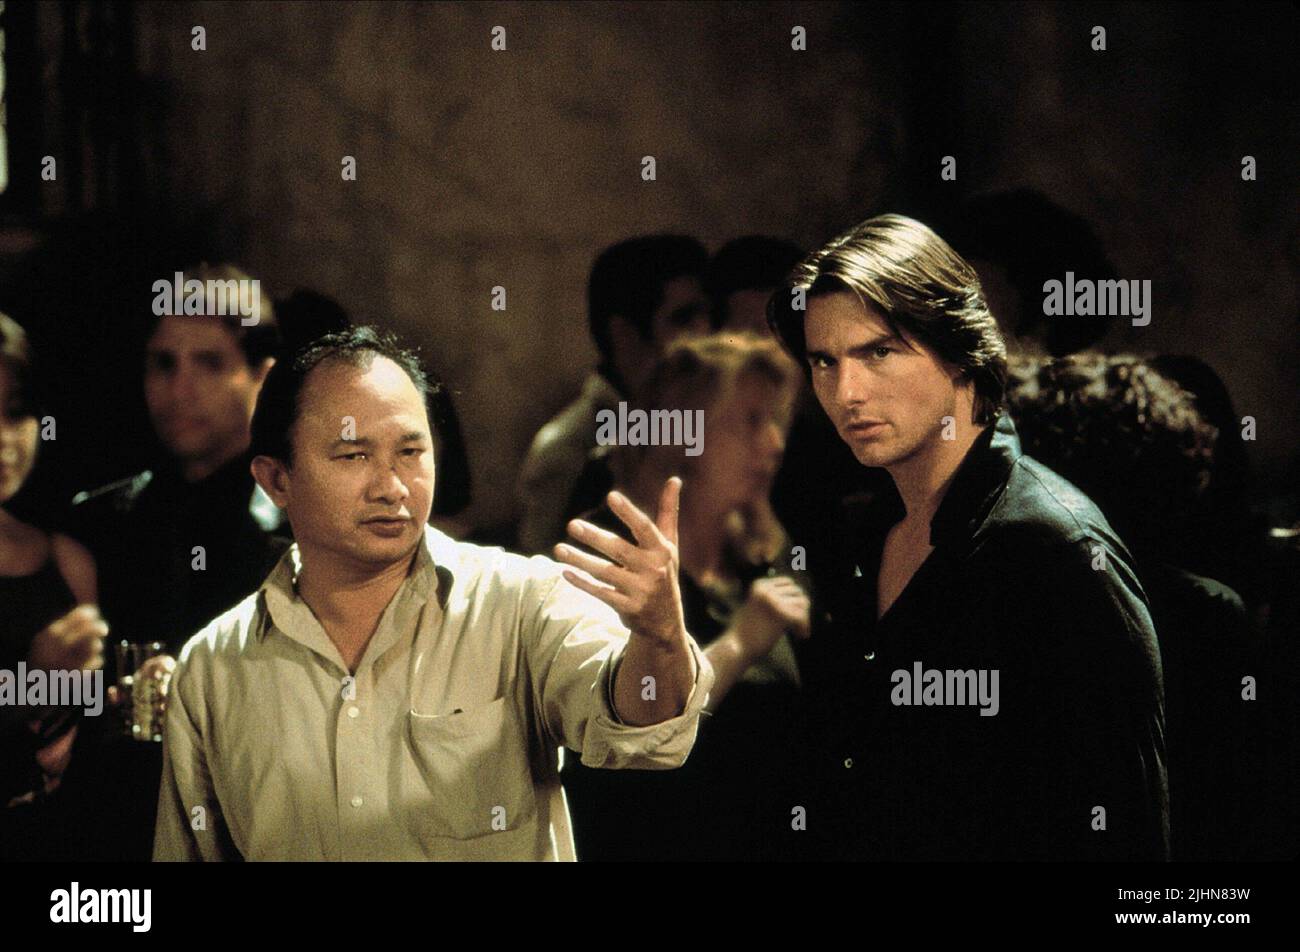 JOHN WOO, TOM CRUISE, MISSION : IMPOSSIBLE II, 2000 Banque D'Images